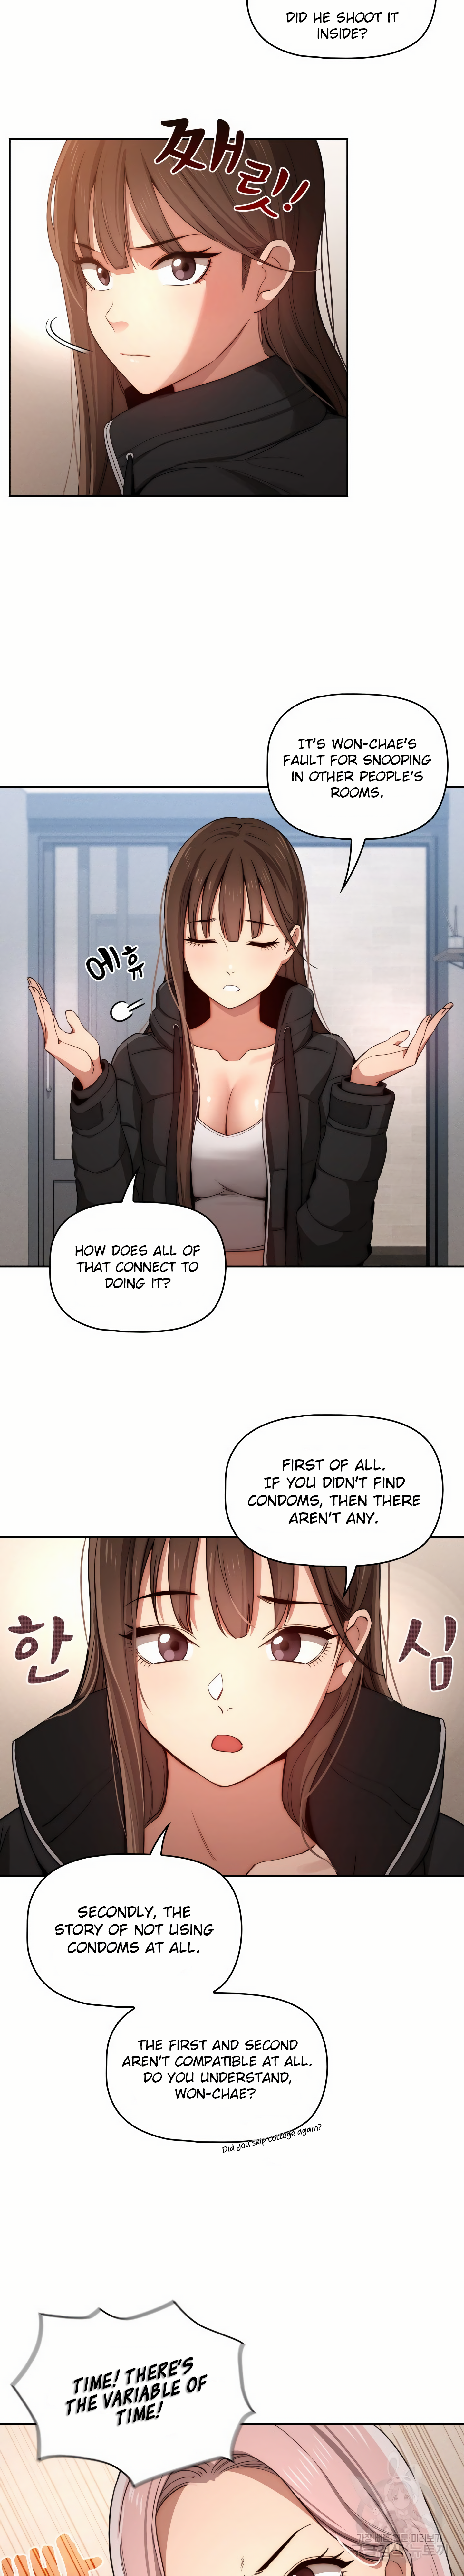 private-tutoring-in-these-difficult-times-chap-34-1